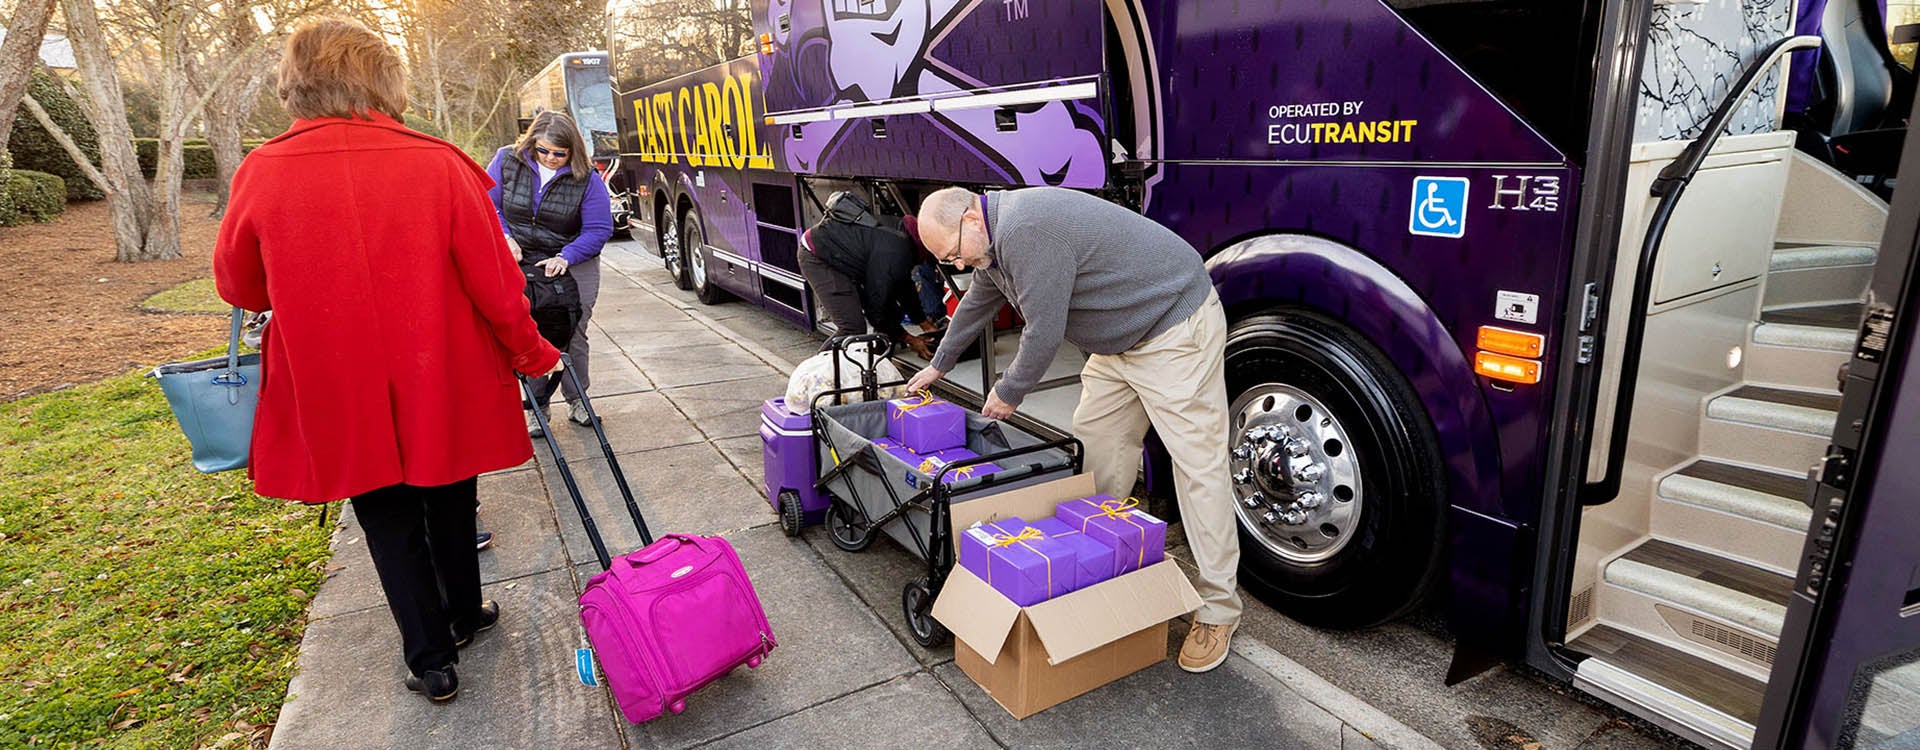 The goal of the bus tour is to engage with community partners and explore ways to connect ECU's knowledge and skills with the needs of regional industries, organizations and nonprofits.